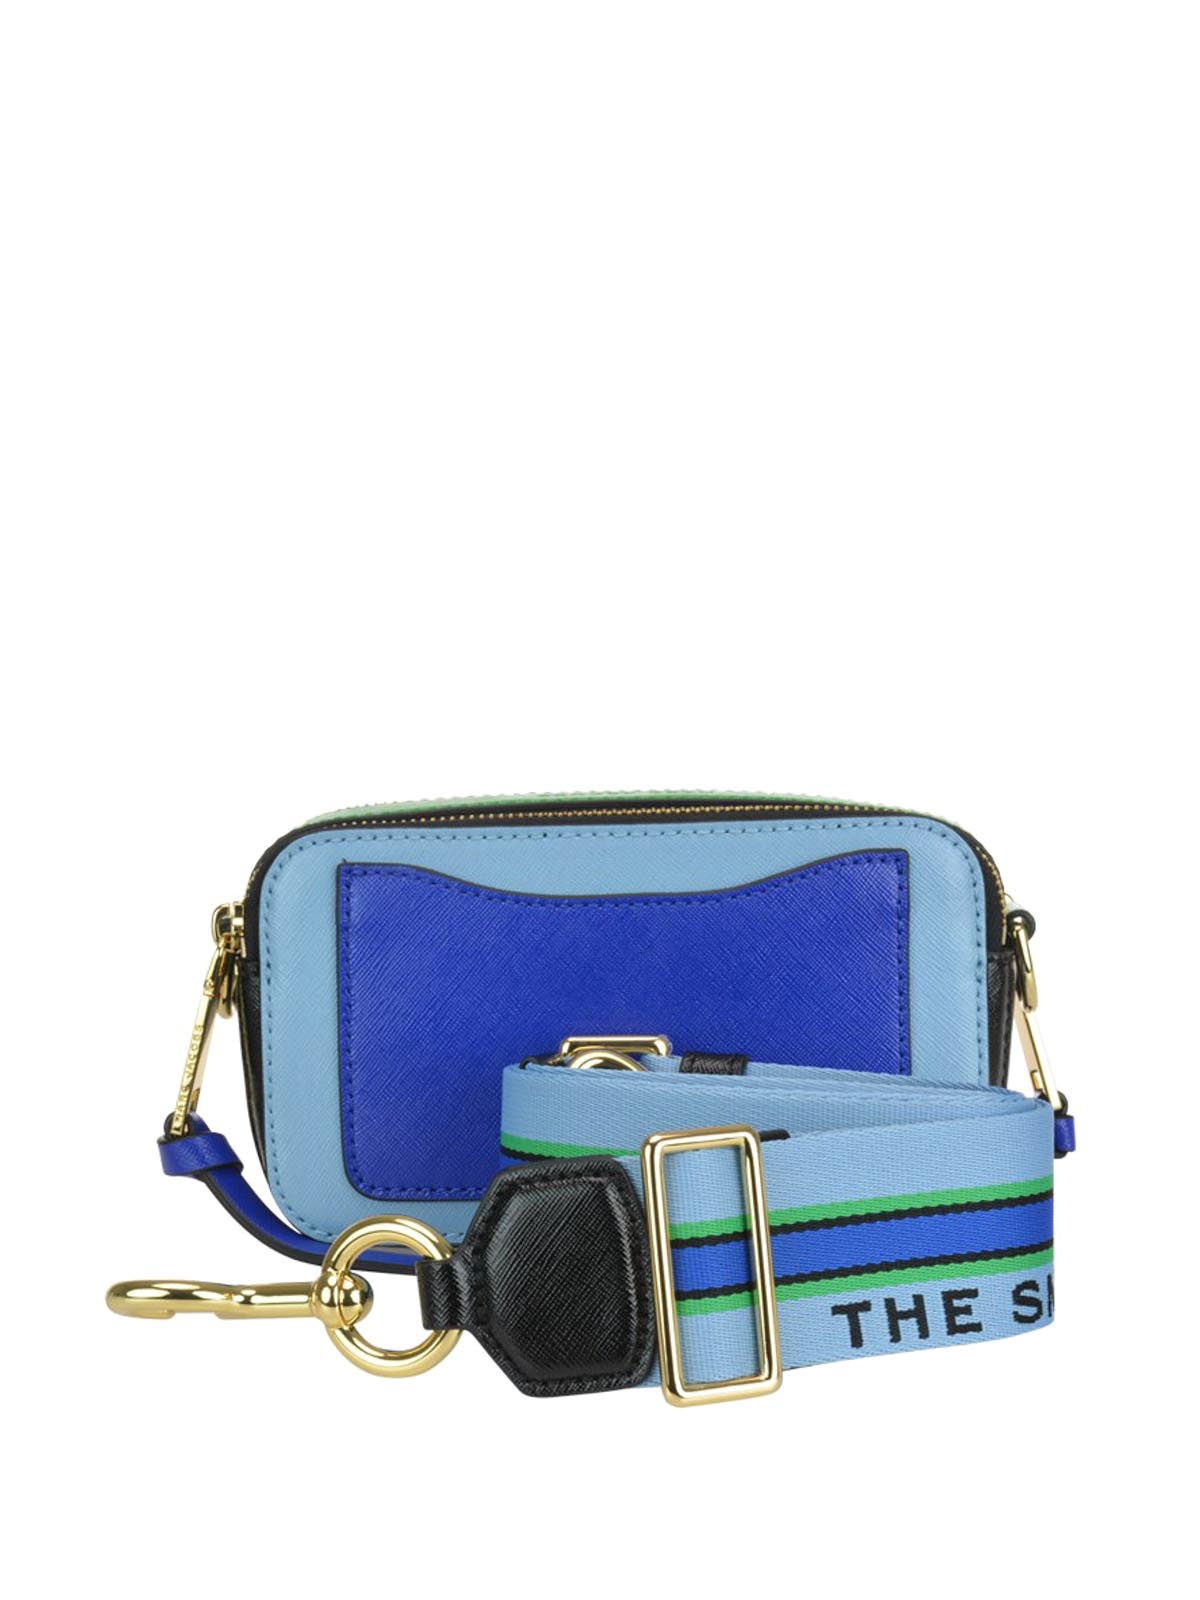 The Snapshot Small Camera Style Bag Leather Designer Bags Dual Top